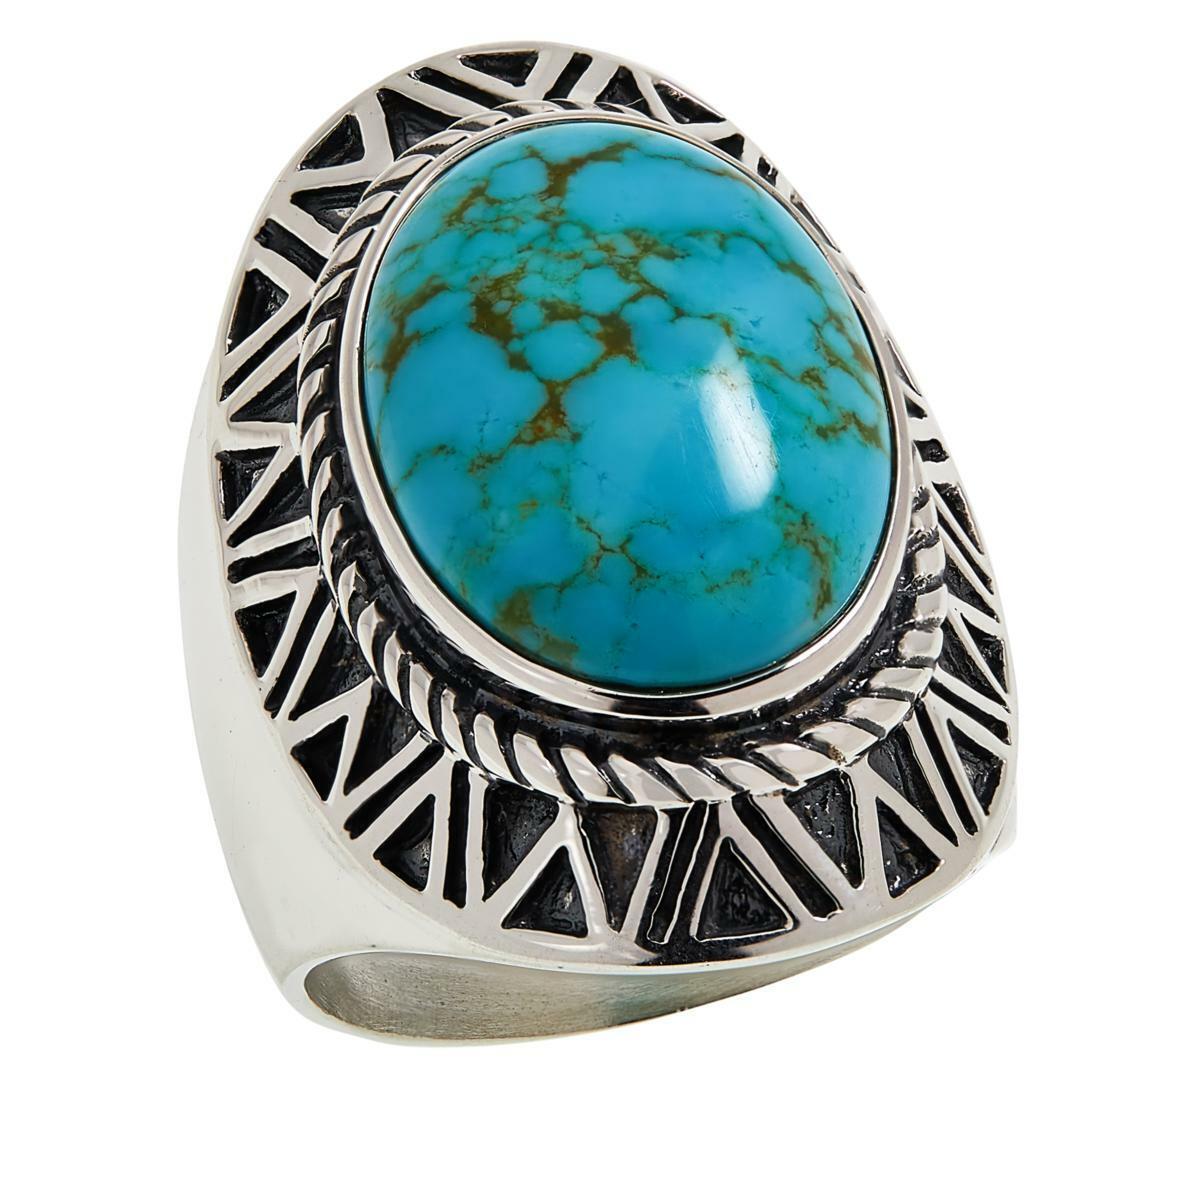 Jay King Gallery Collection Sonoran Turquoise Oval Ring. Size 6